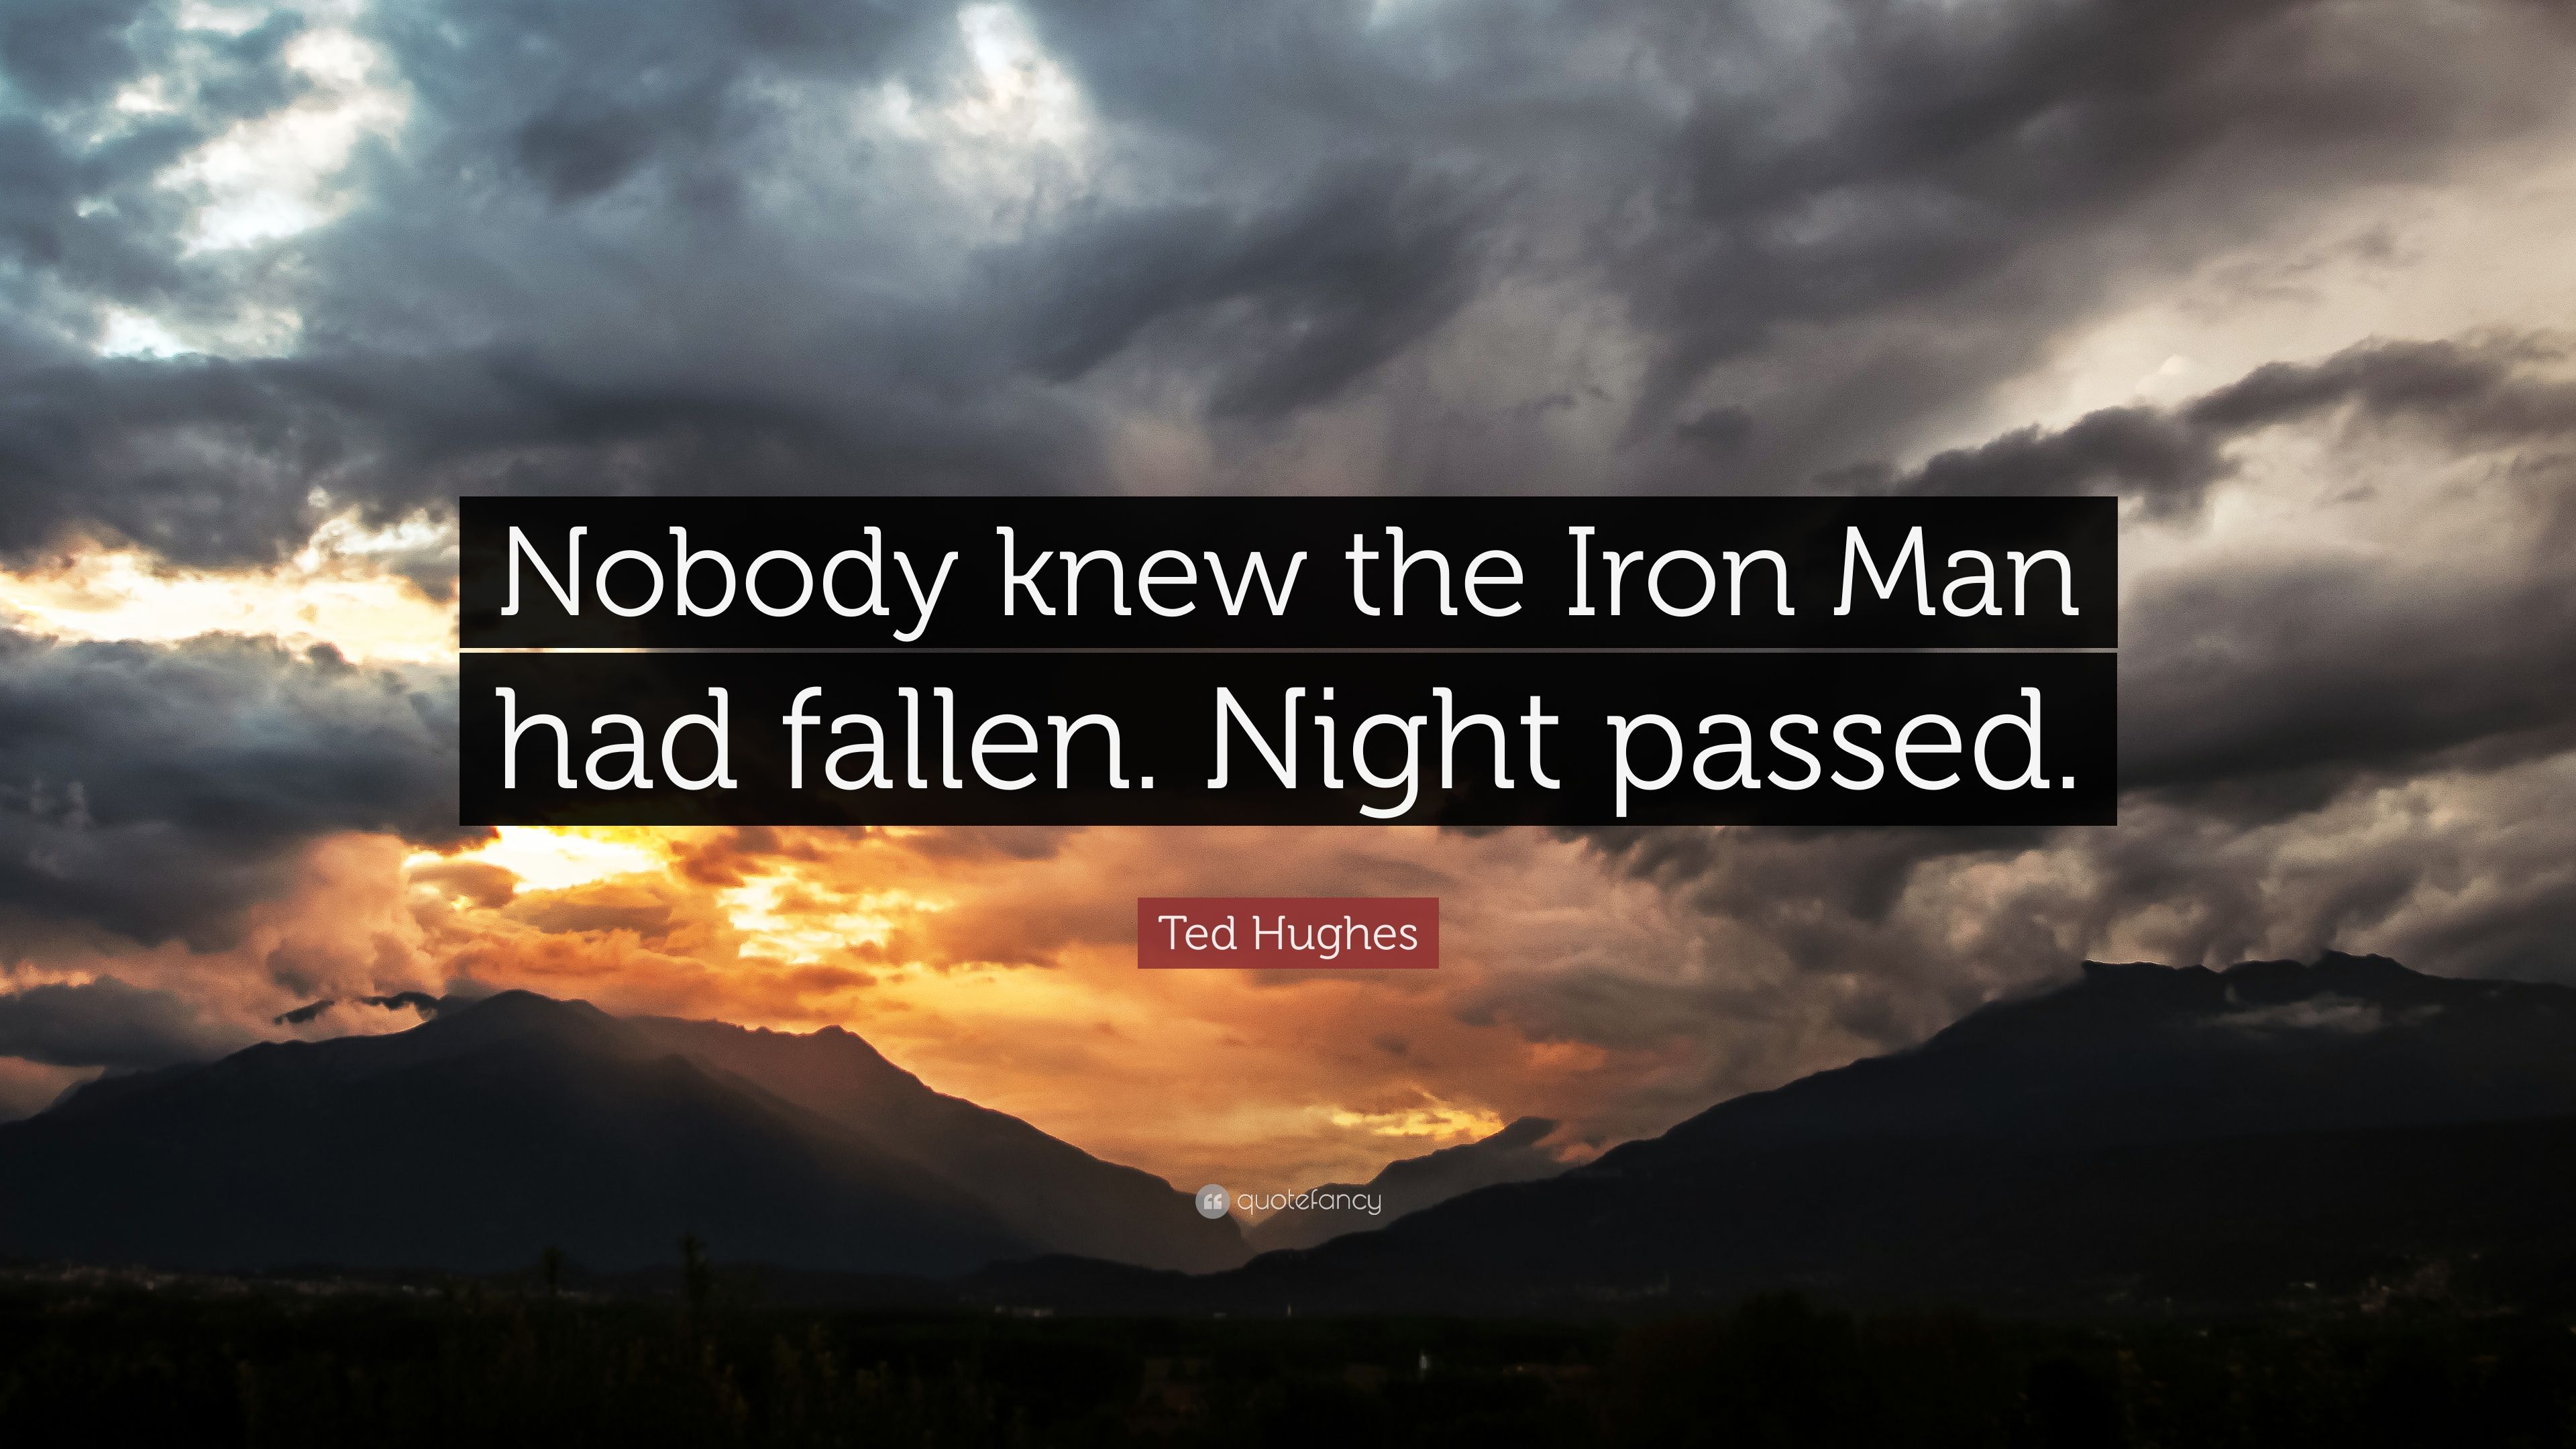 Ted Hughes Quote: “Nobody knew the Iron Man had fallen. Night